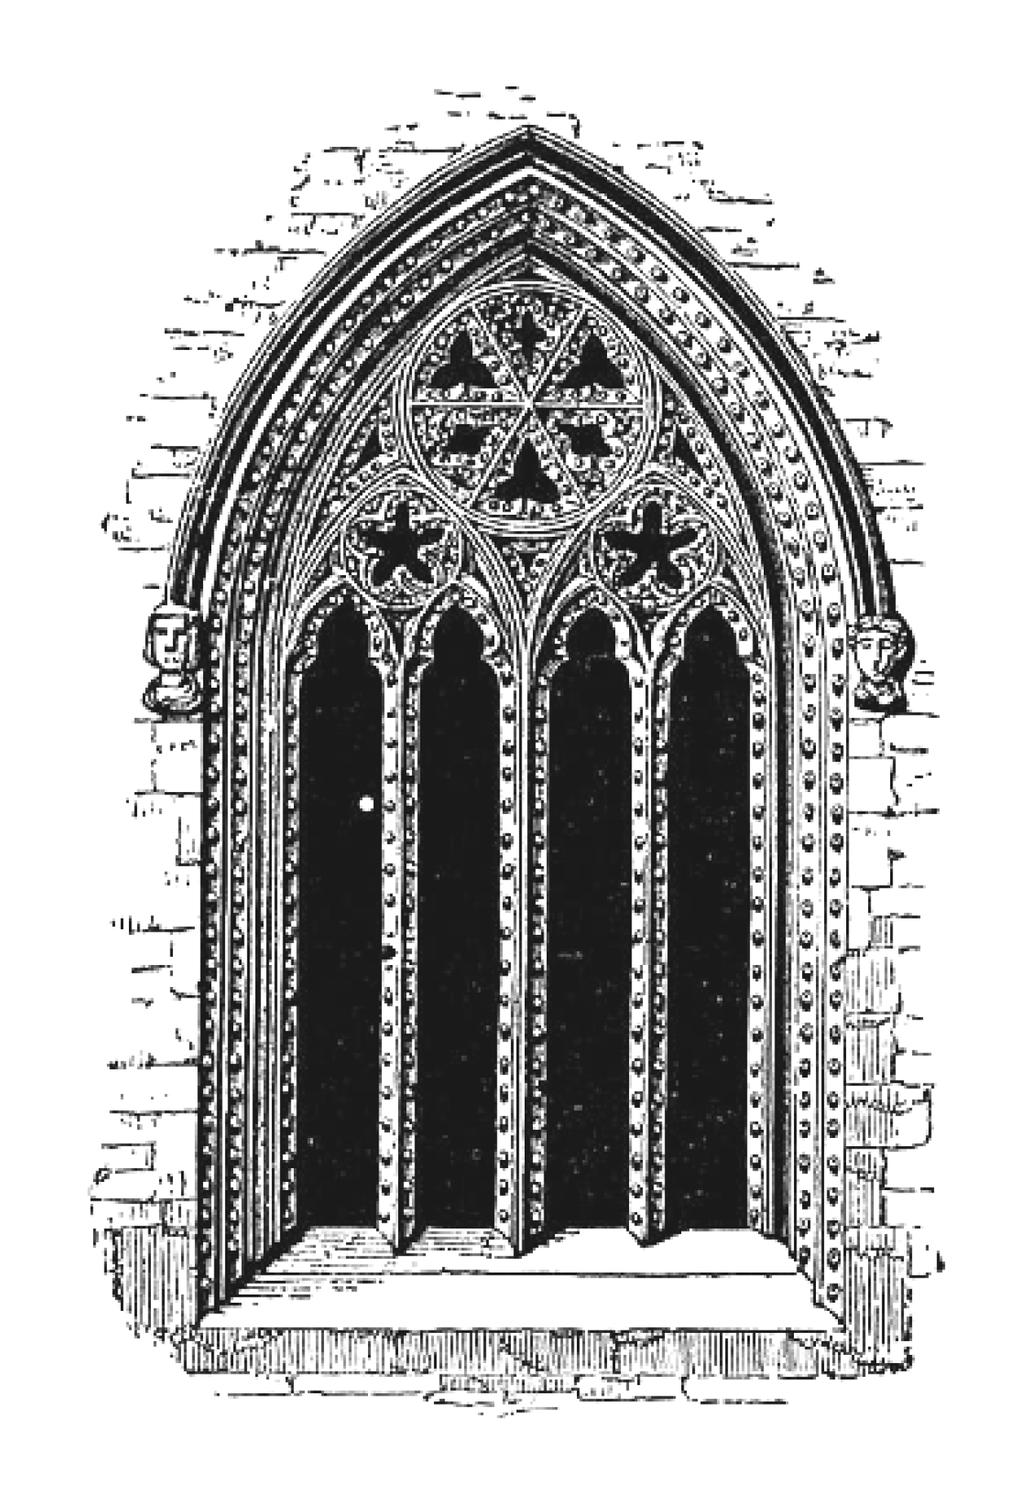 Question 8 Geometry and Trigonometry (40 marks) Windows are sometimes in the shape of a pointed arch, like the one shown in the picture. A person is designing such an arched window.